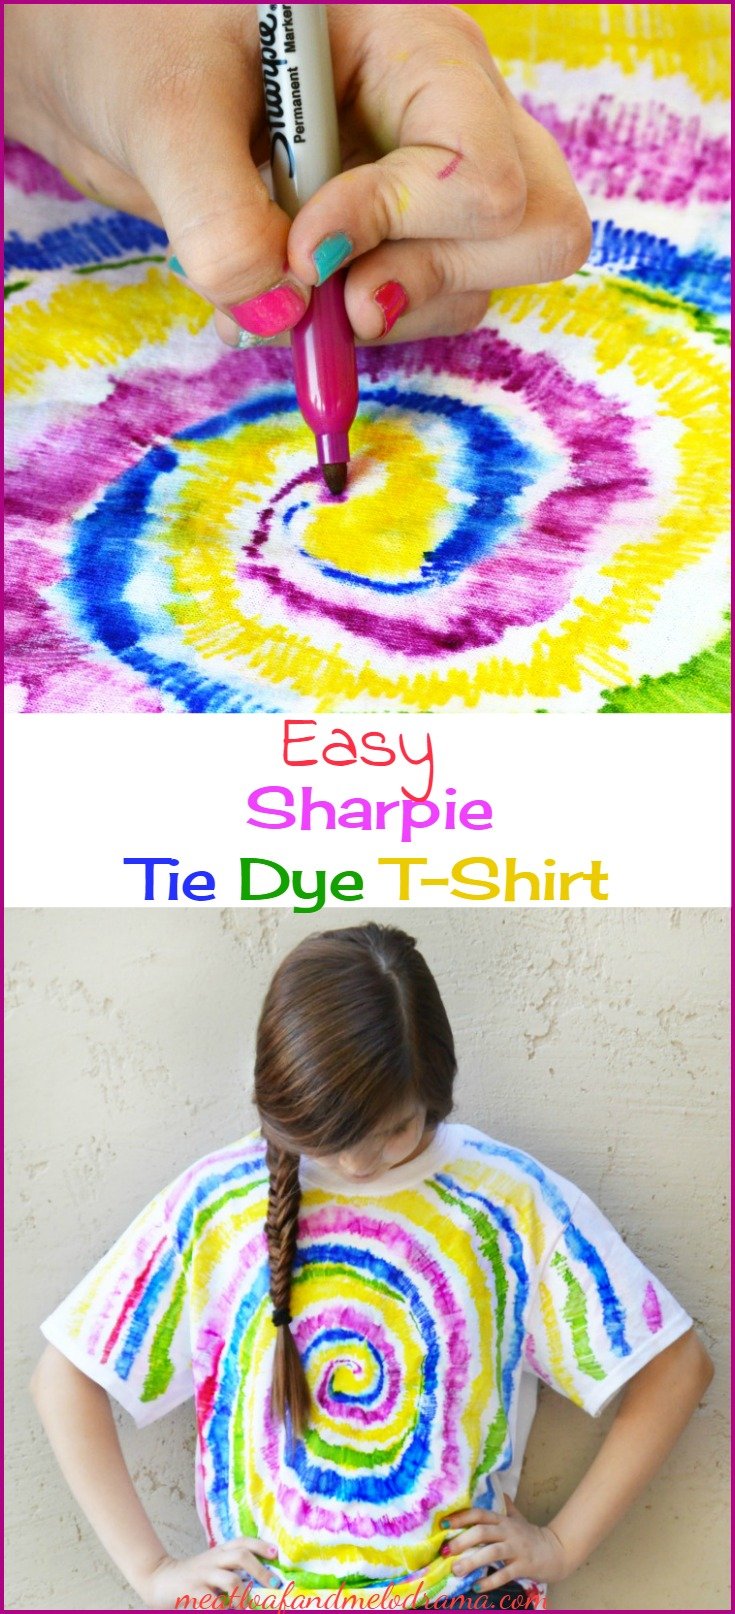 easy colorful sharpie designs